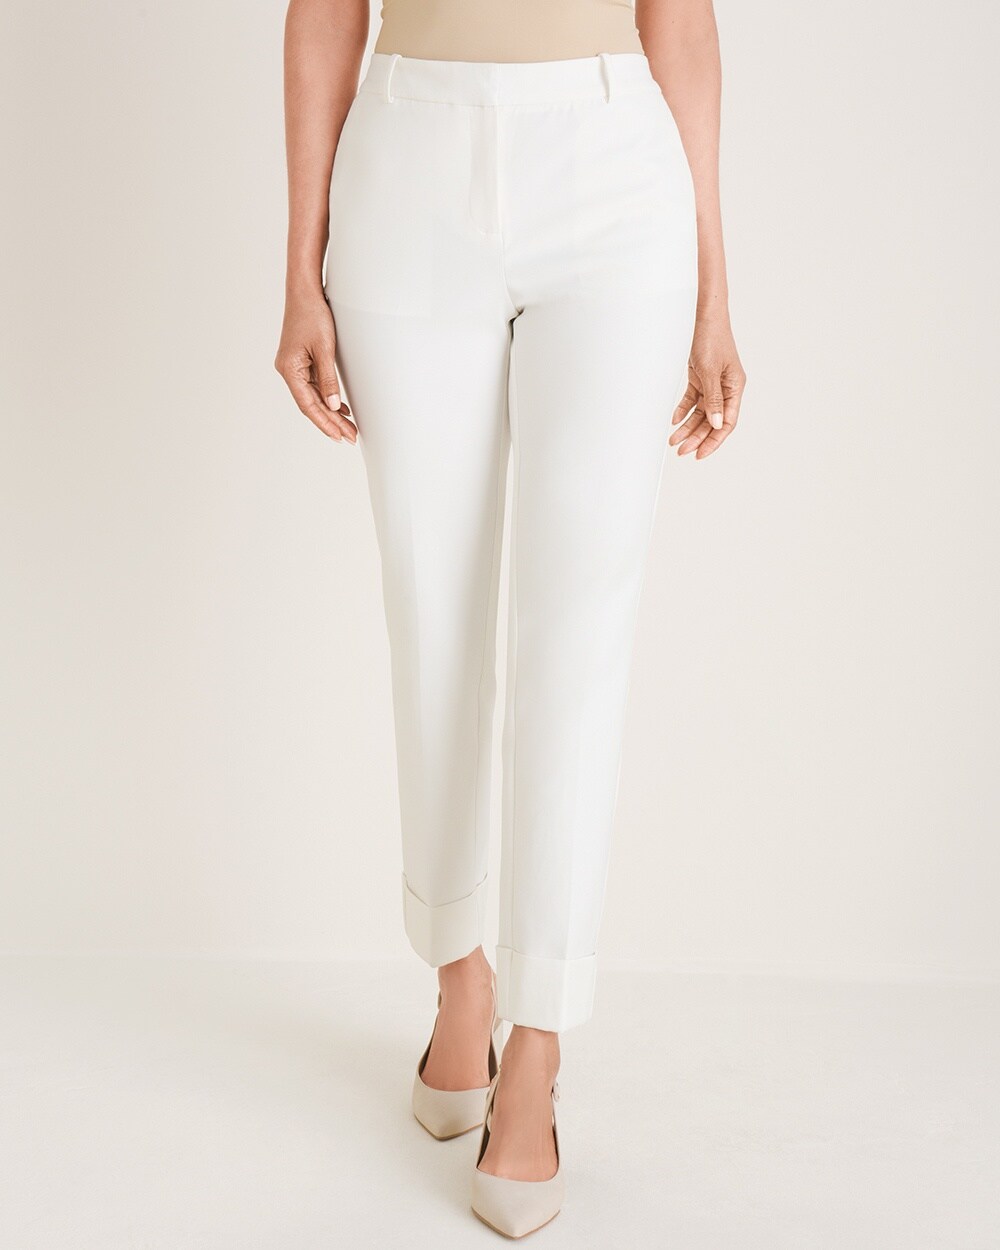 Fly-Front Ankle Pants